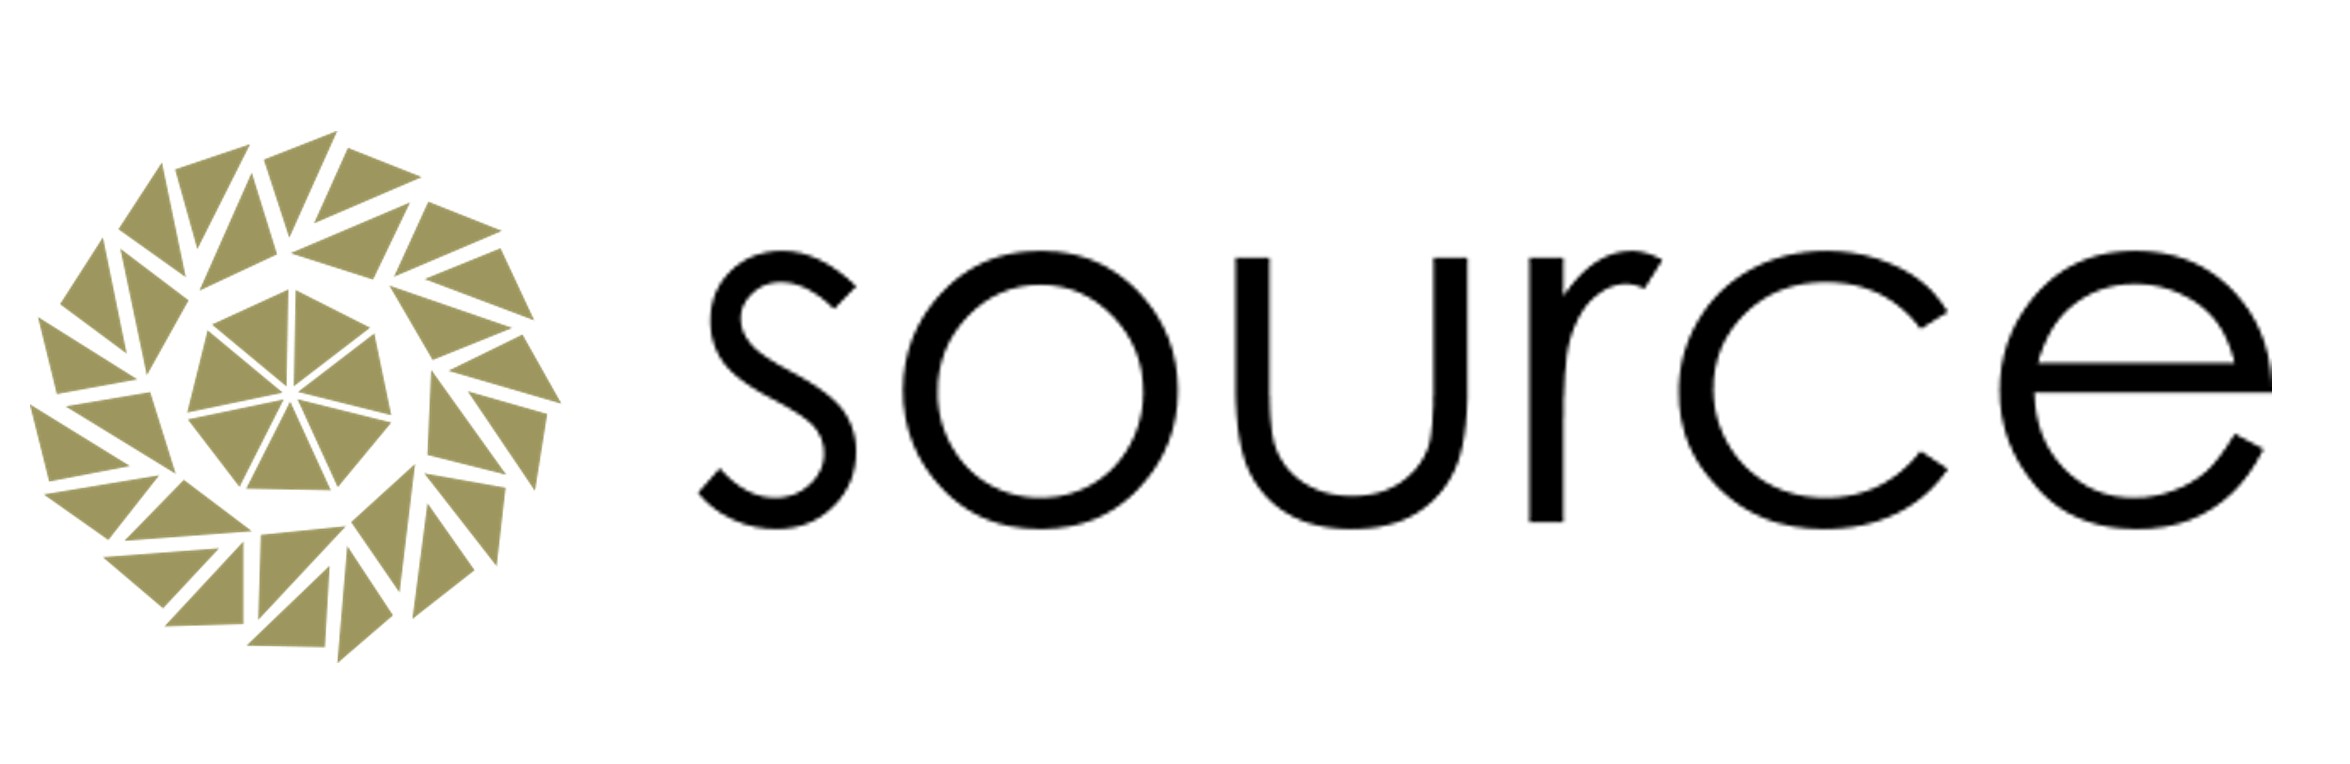 source store Bangkok - Online store of furniture and interior goods.